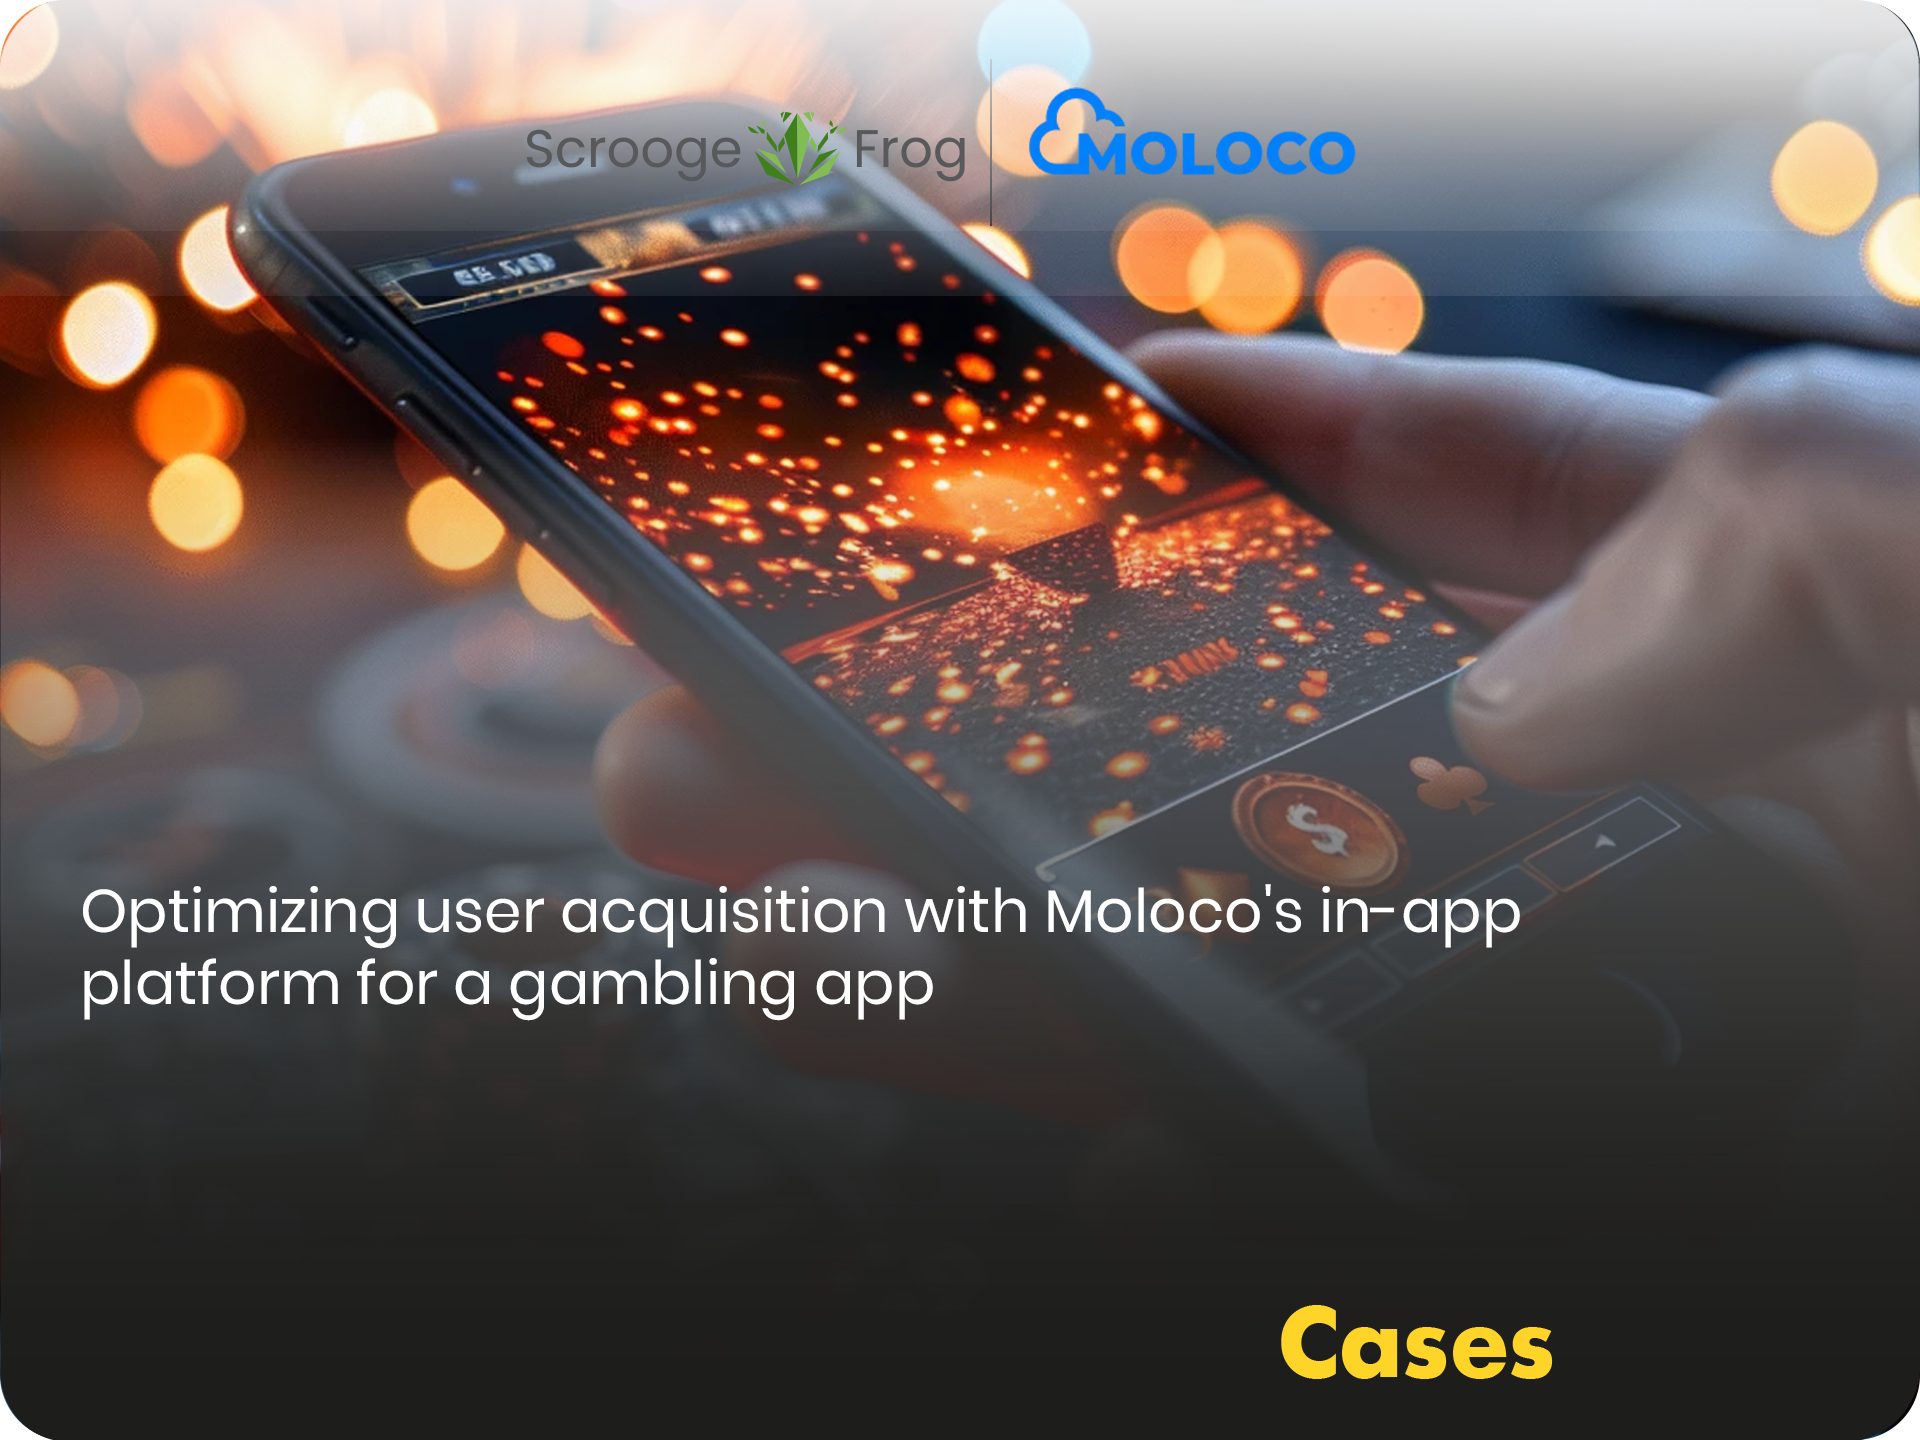 Optimizing user acquisition with Moloco’s in-app platform for a gambling app